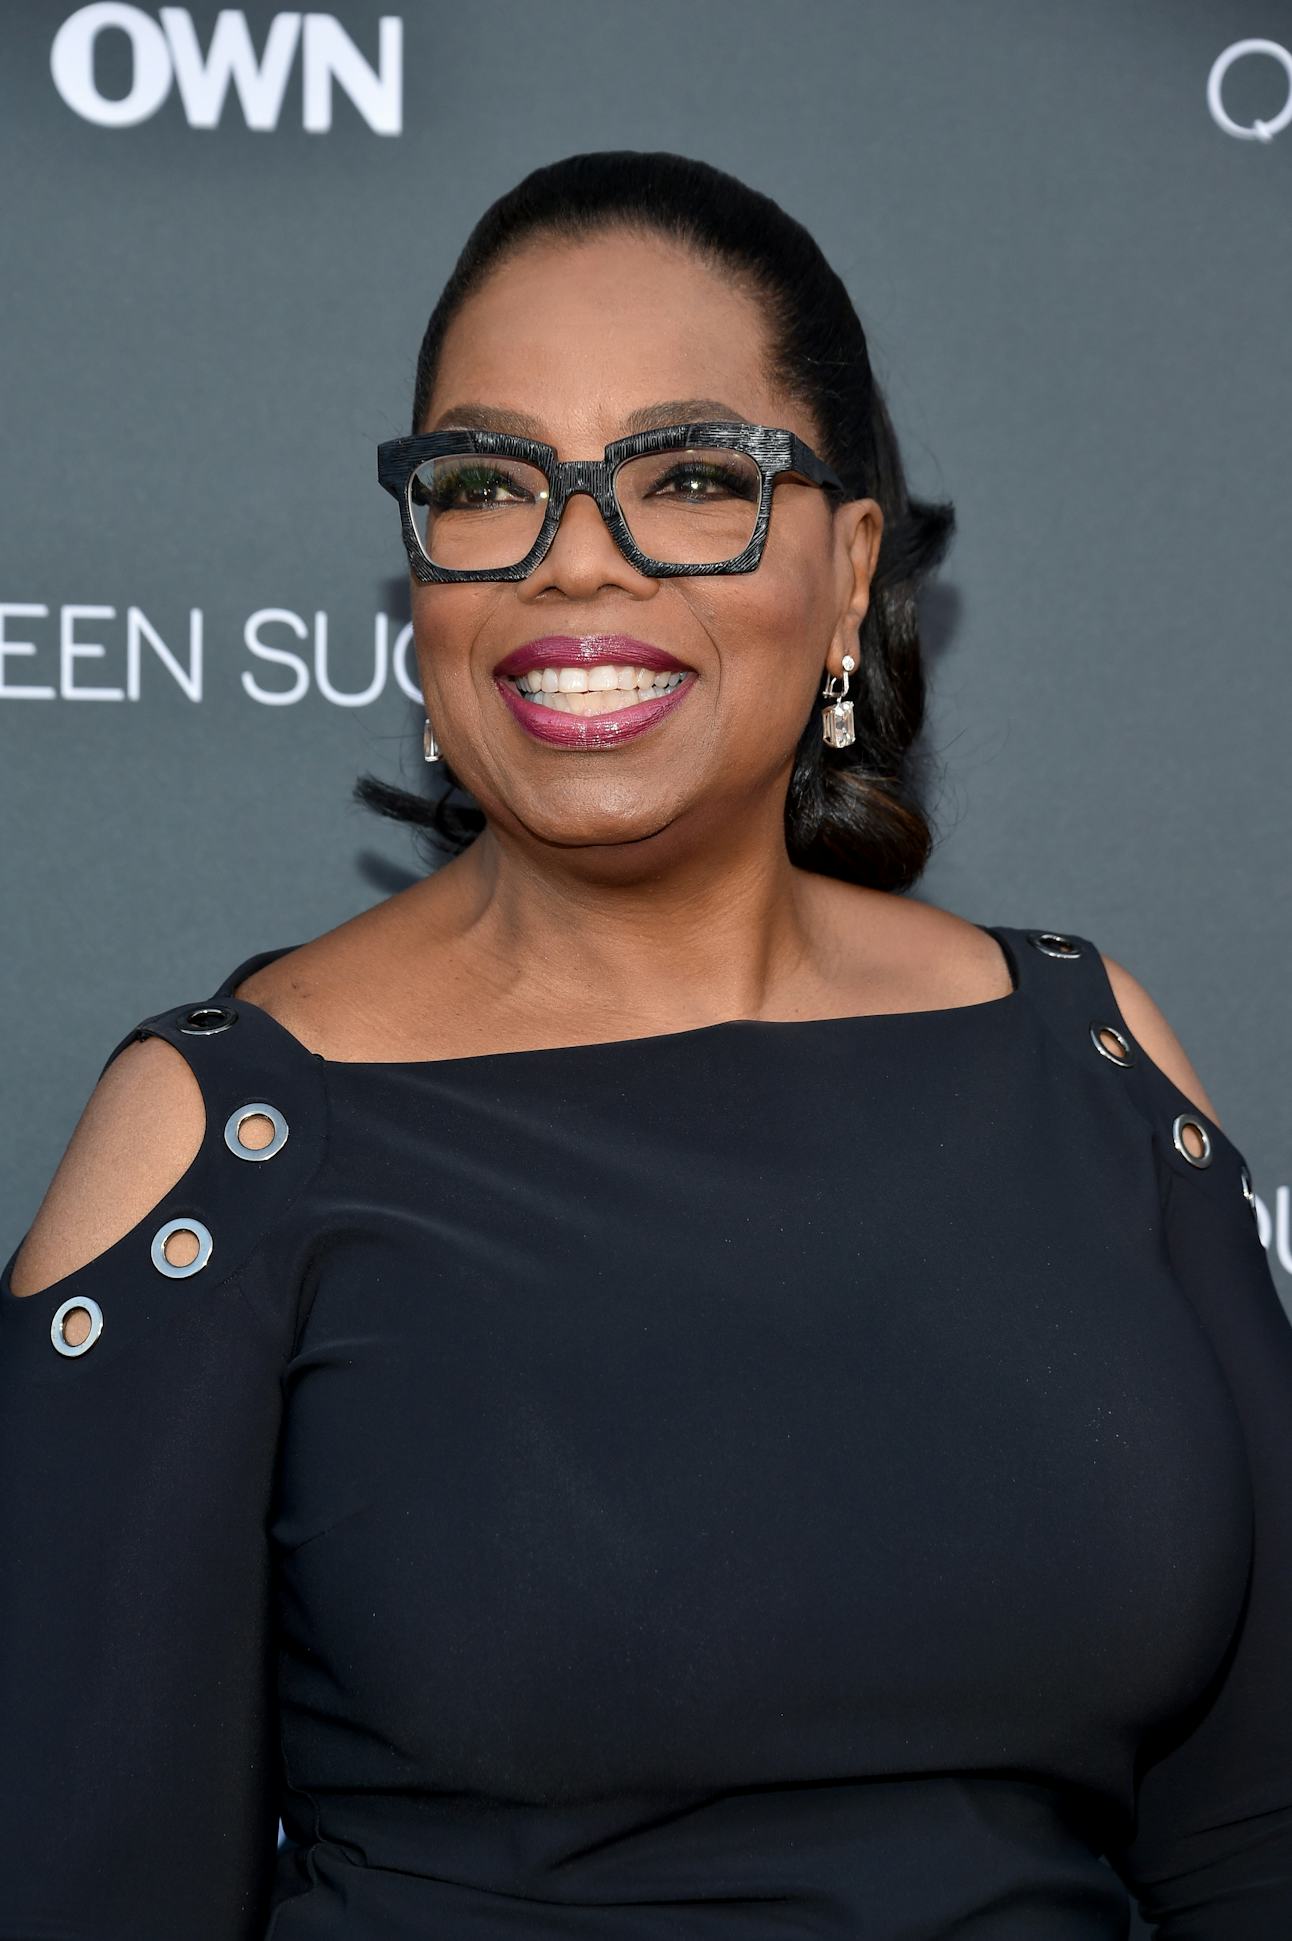 It's time to talk about Oprah's truly incredible glasses collection